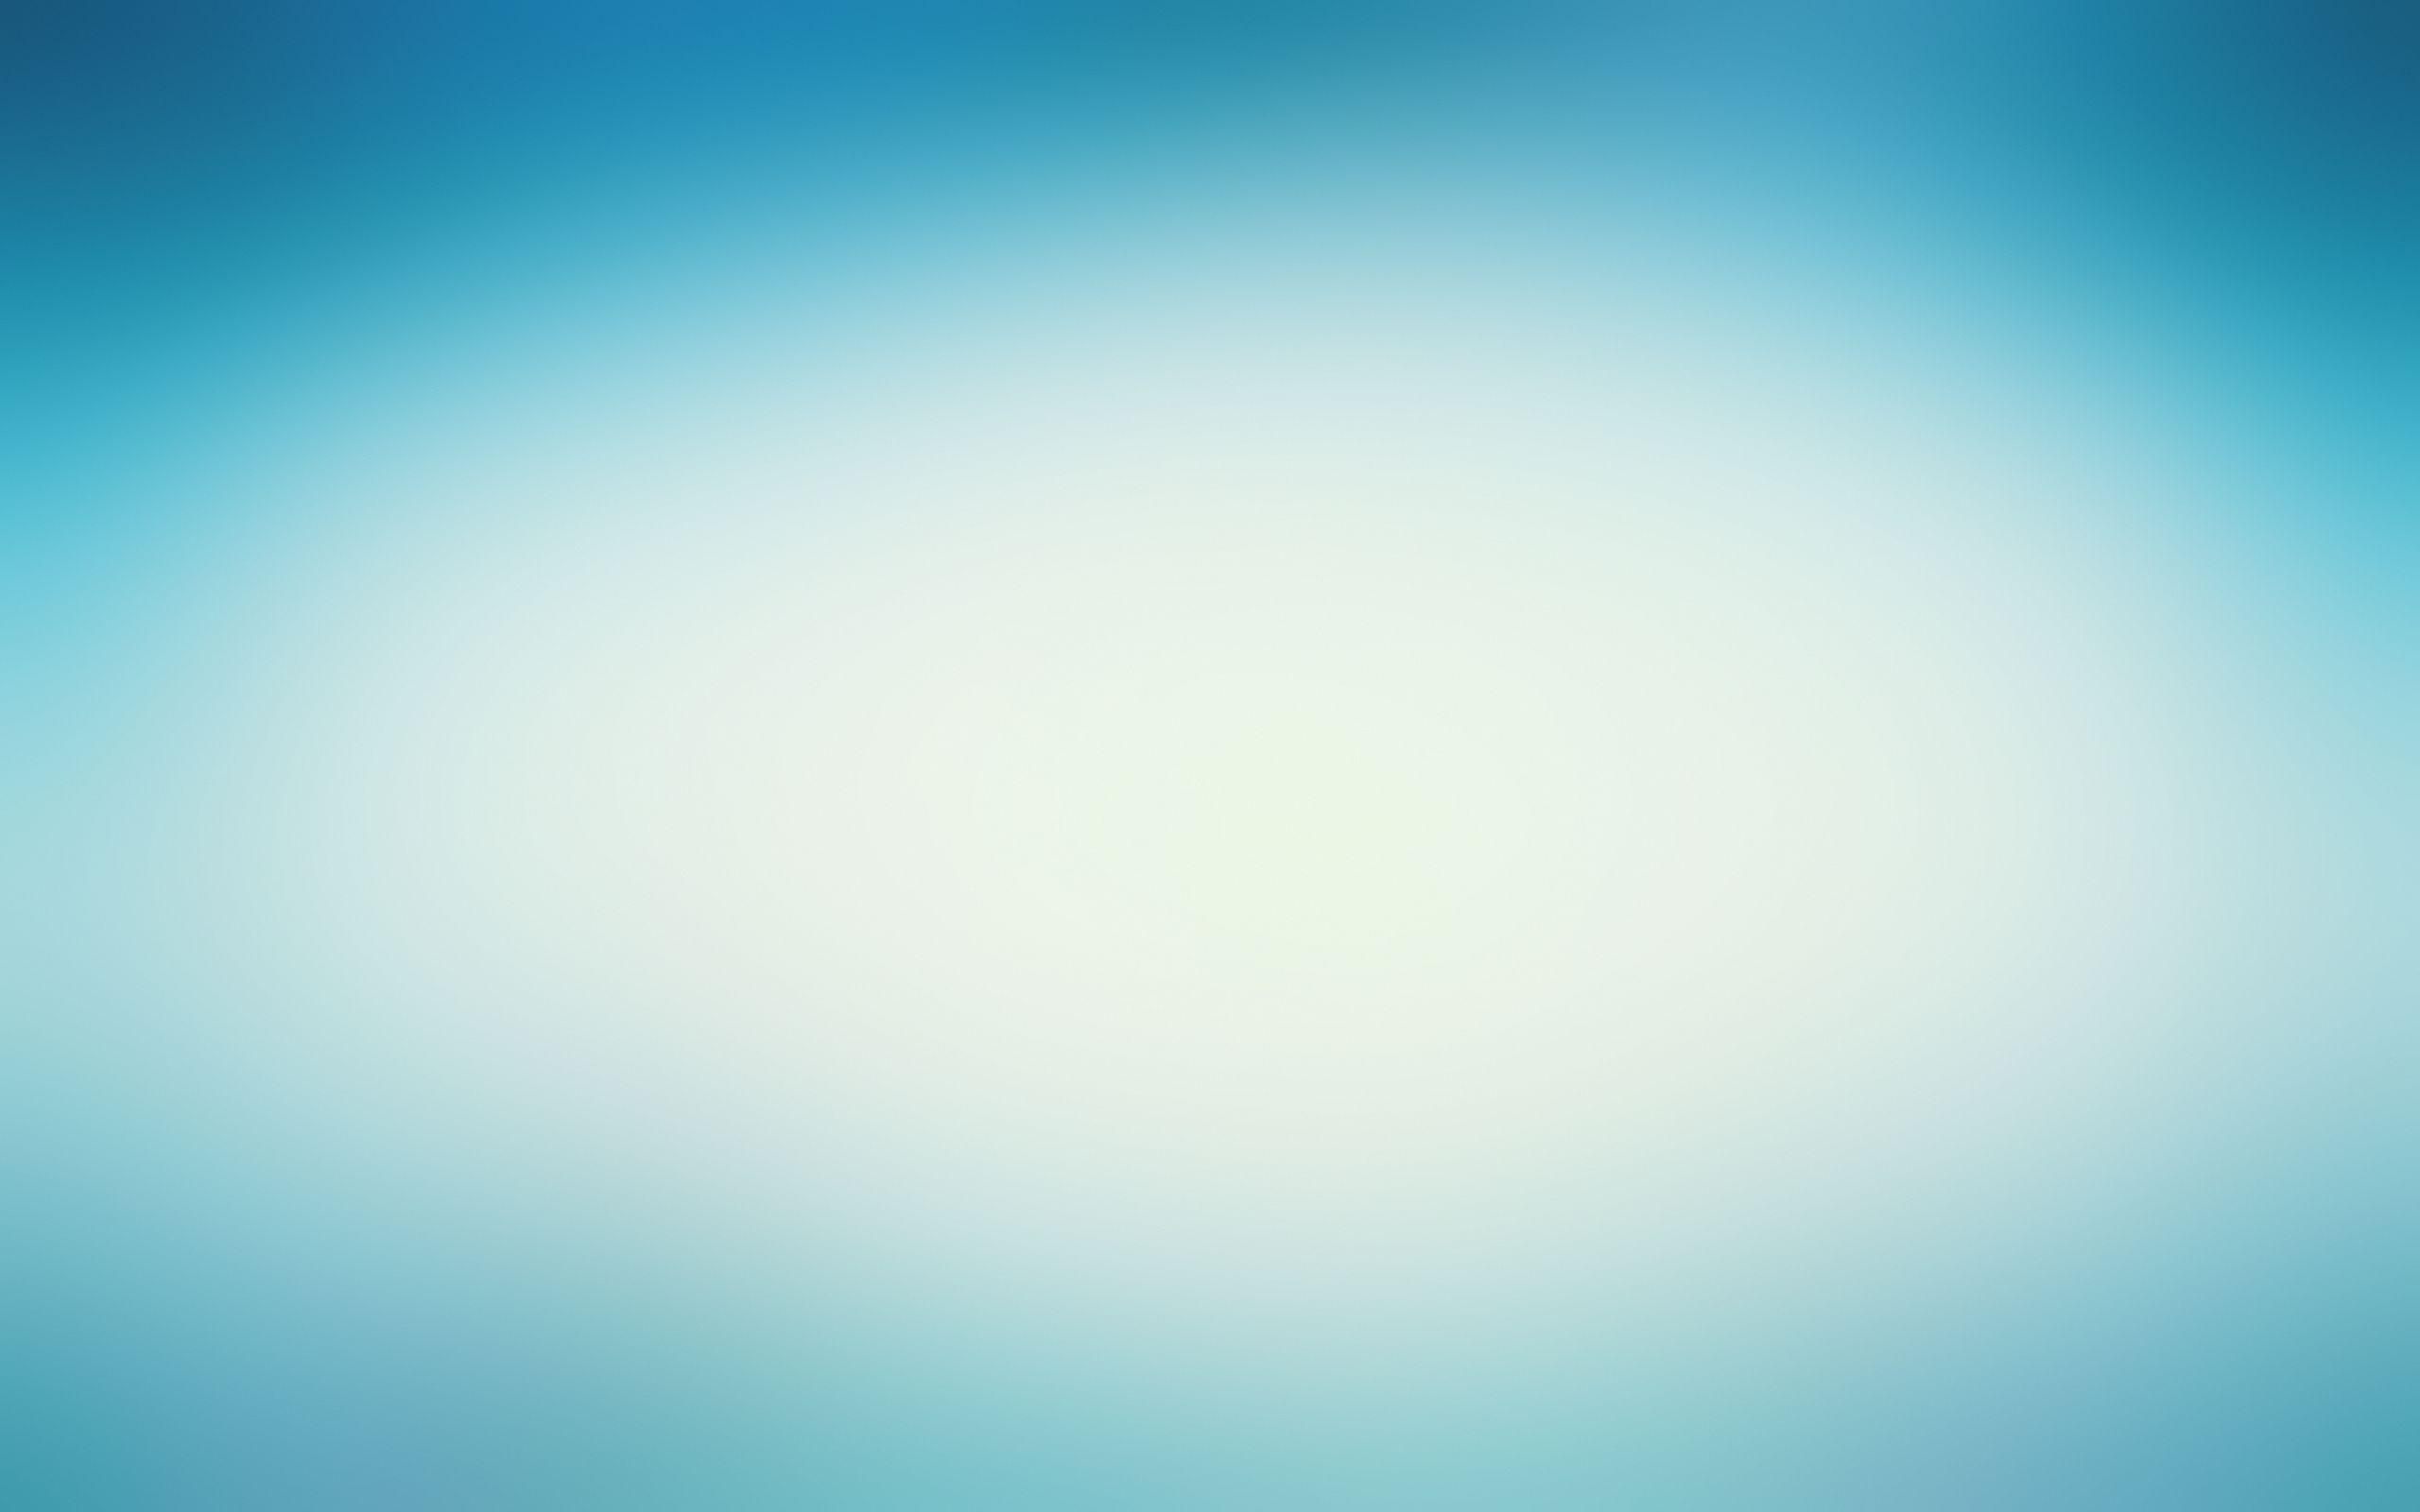 Background for your computer or presentation